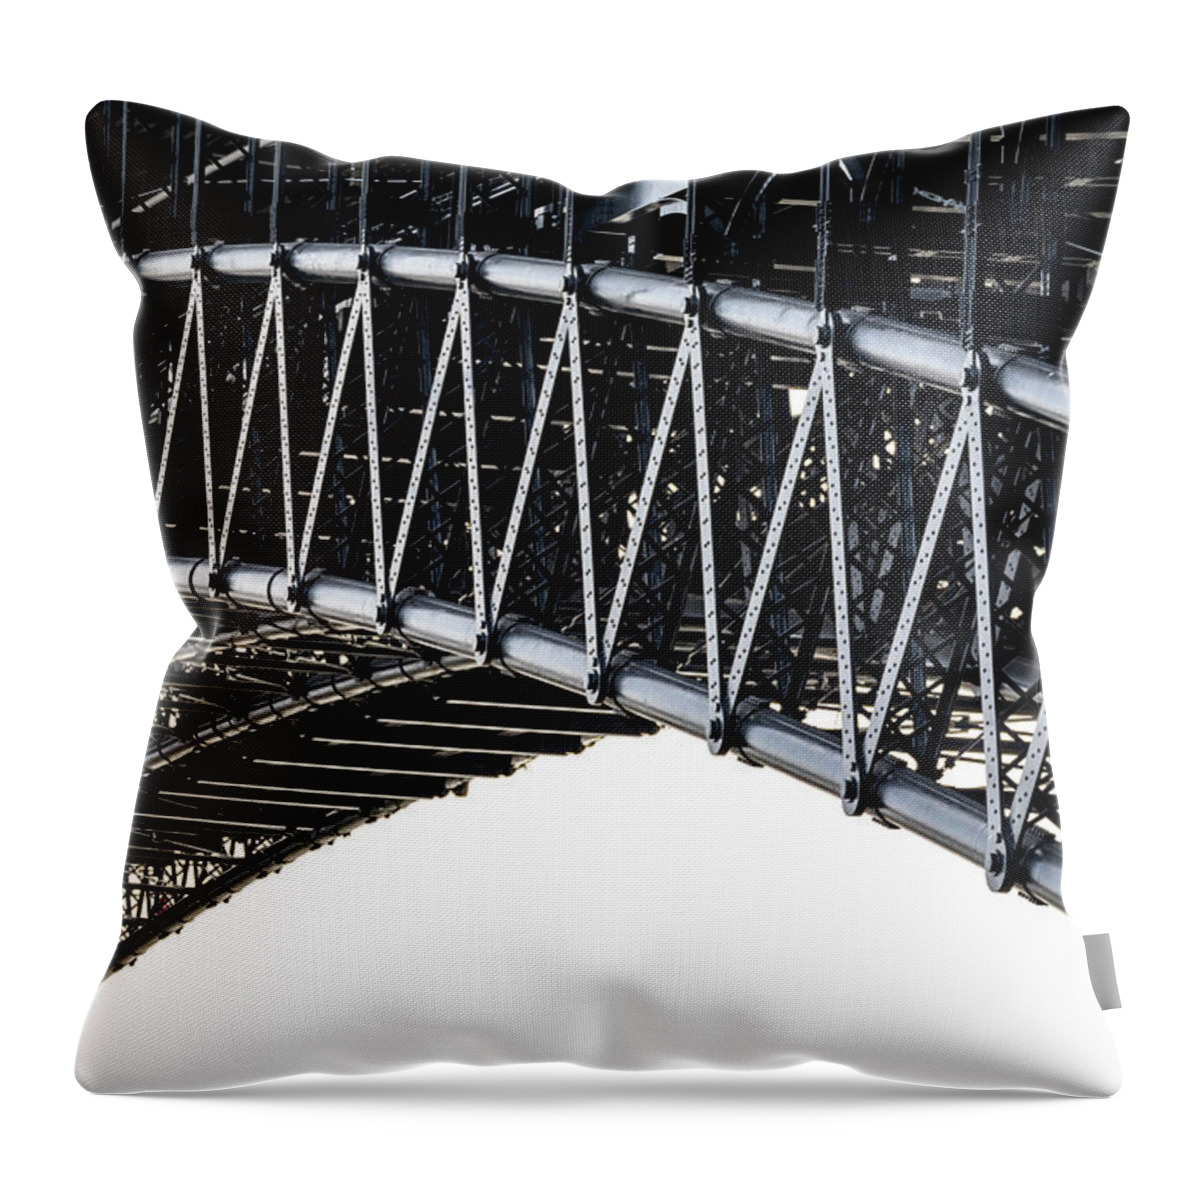 Eads Bridge Throw Pillow featuring the photograph Eads Bridge by Holly Ross